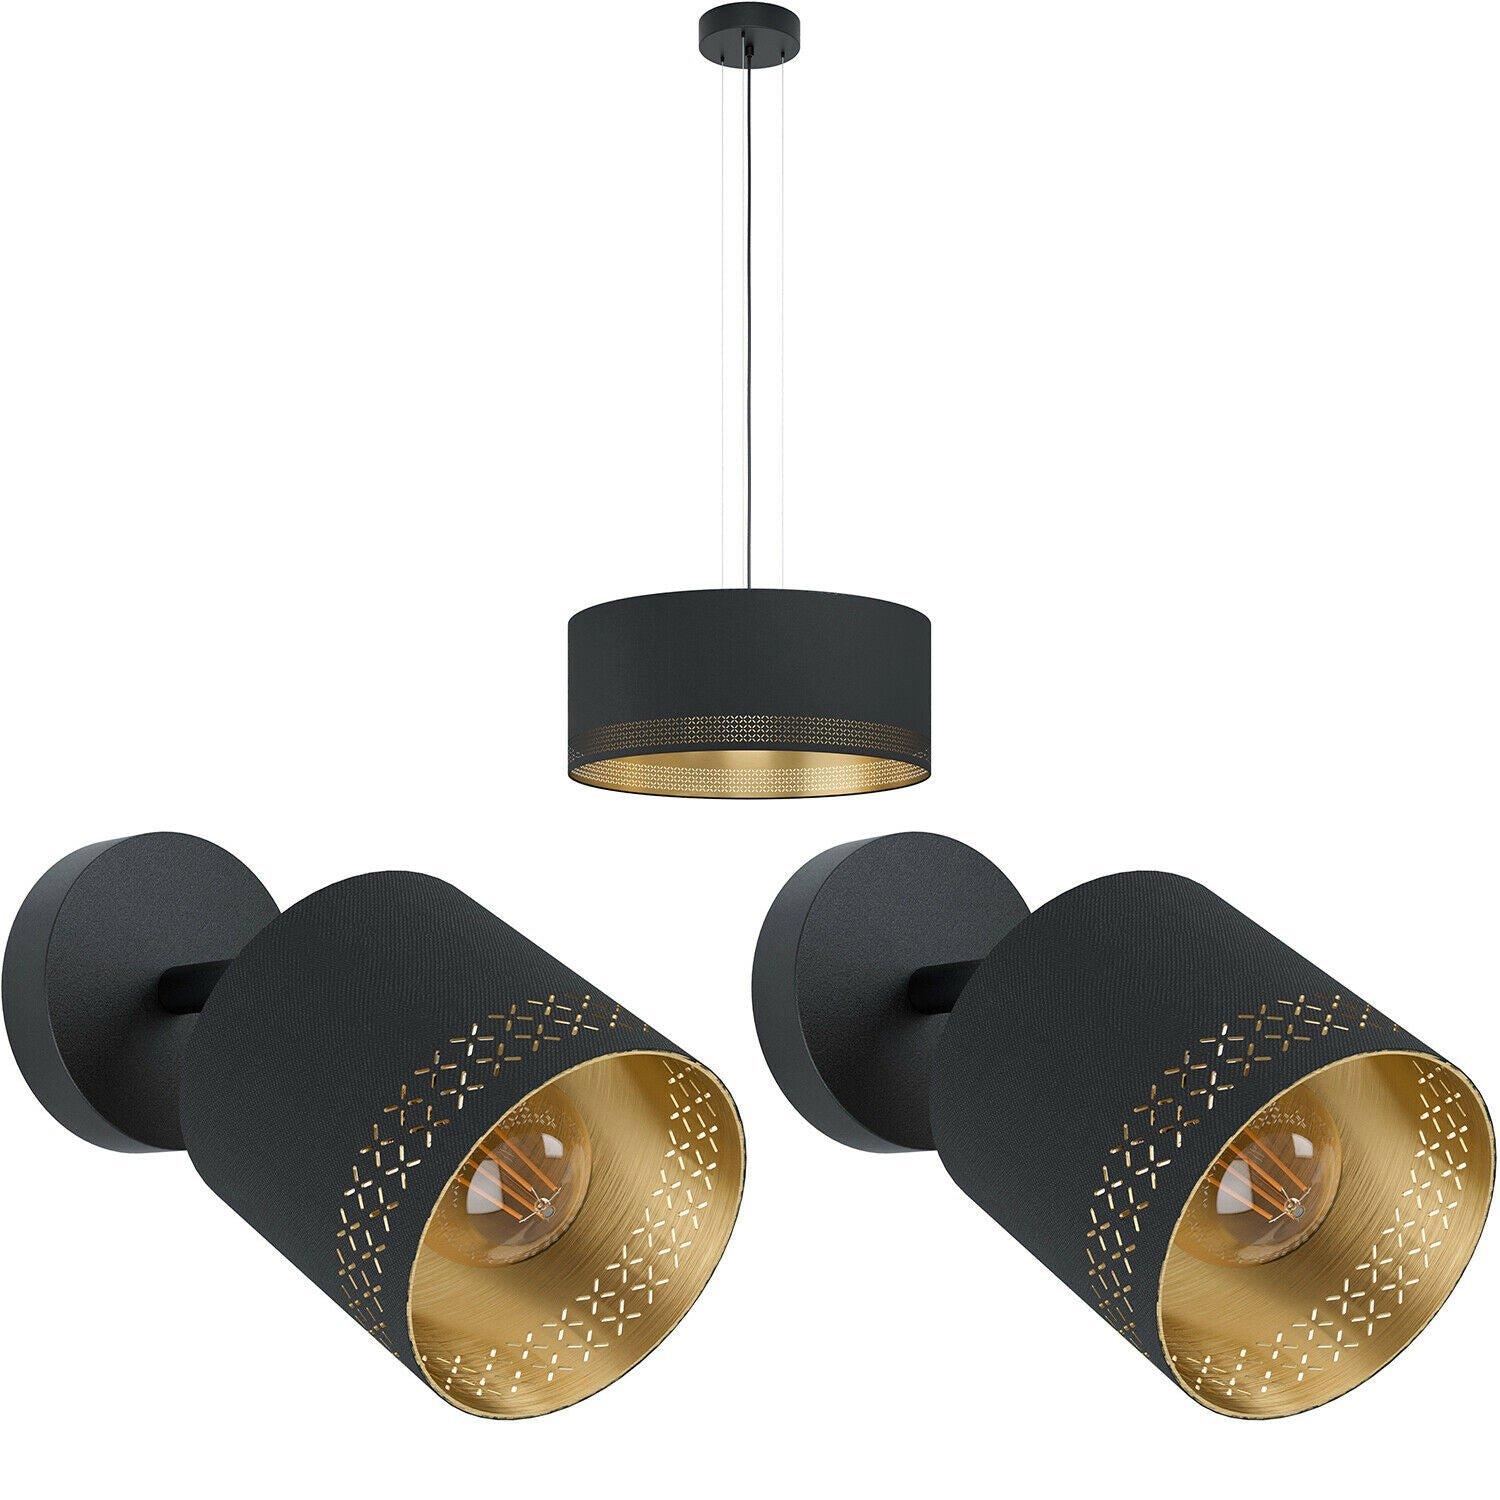 Ceiling Pendant Light & 2x Matching Wall Lights Black & Gold Round Fabric Shade